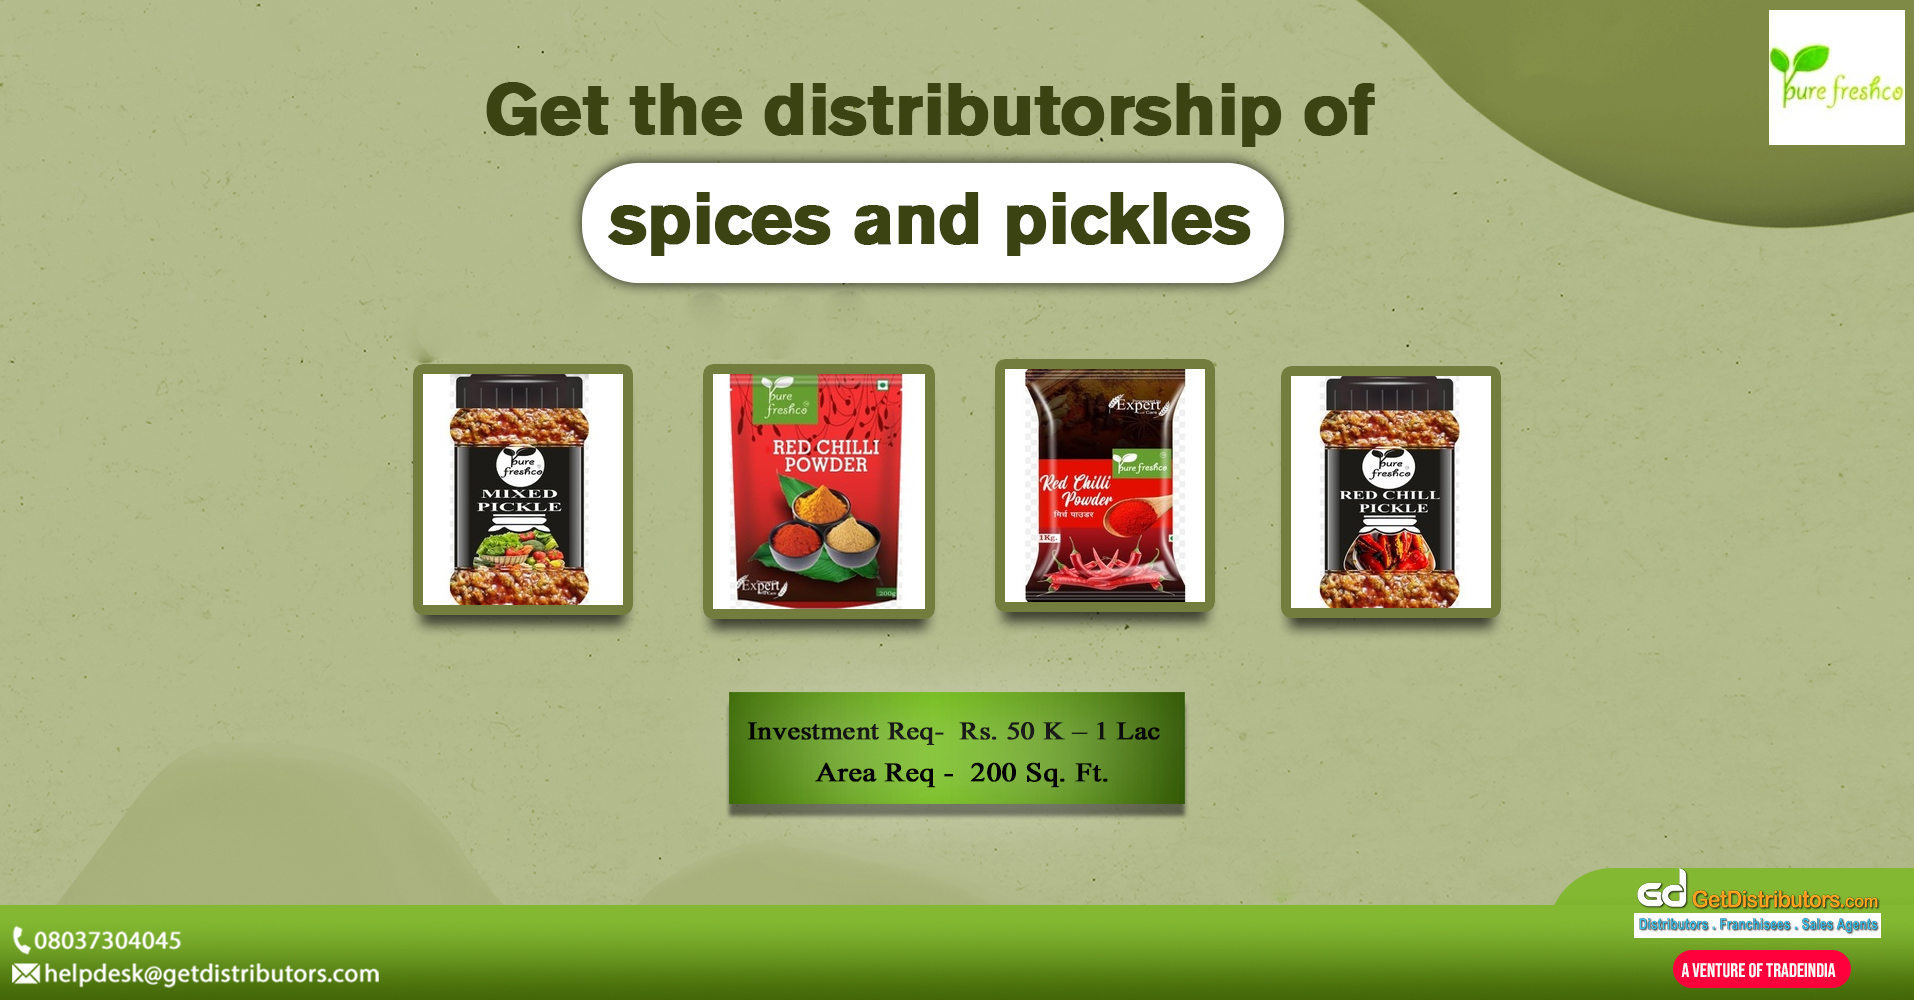 High-grade powdered spices and pickles for distribution